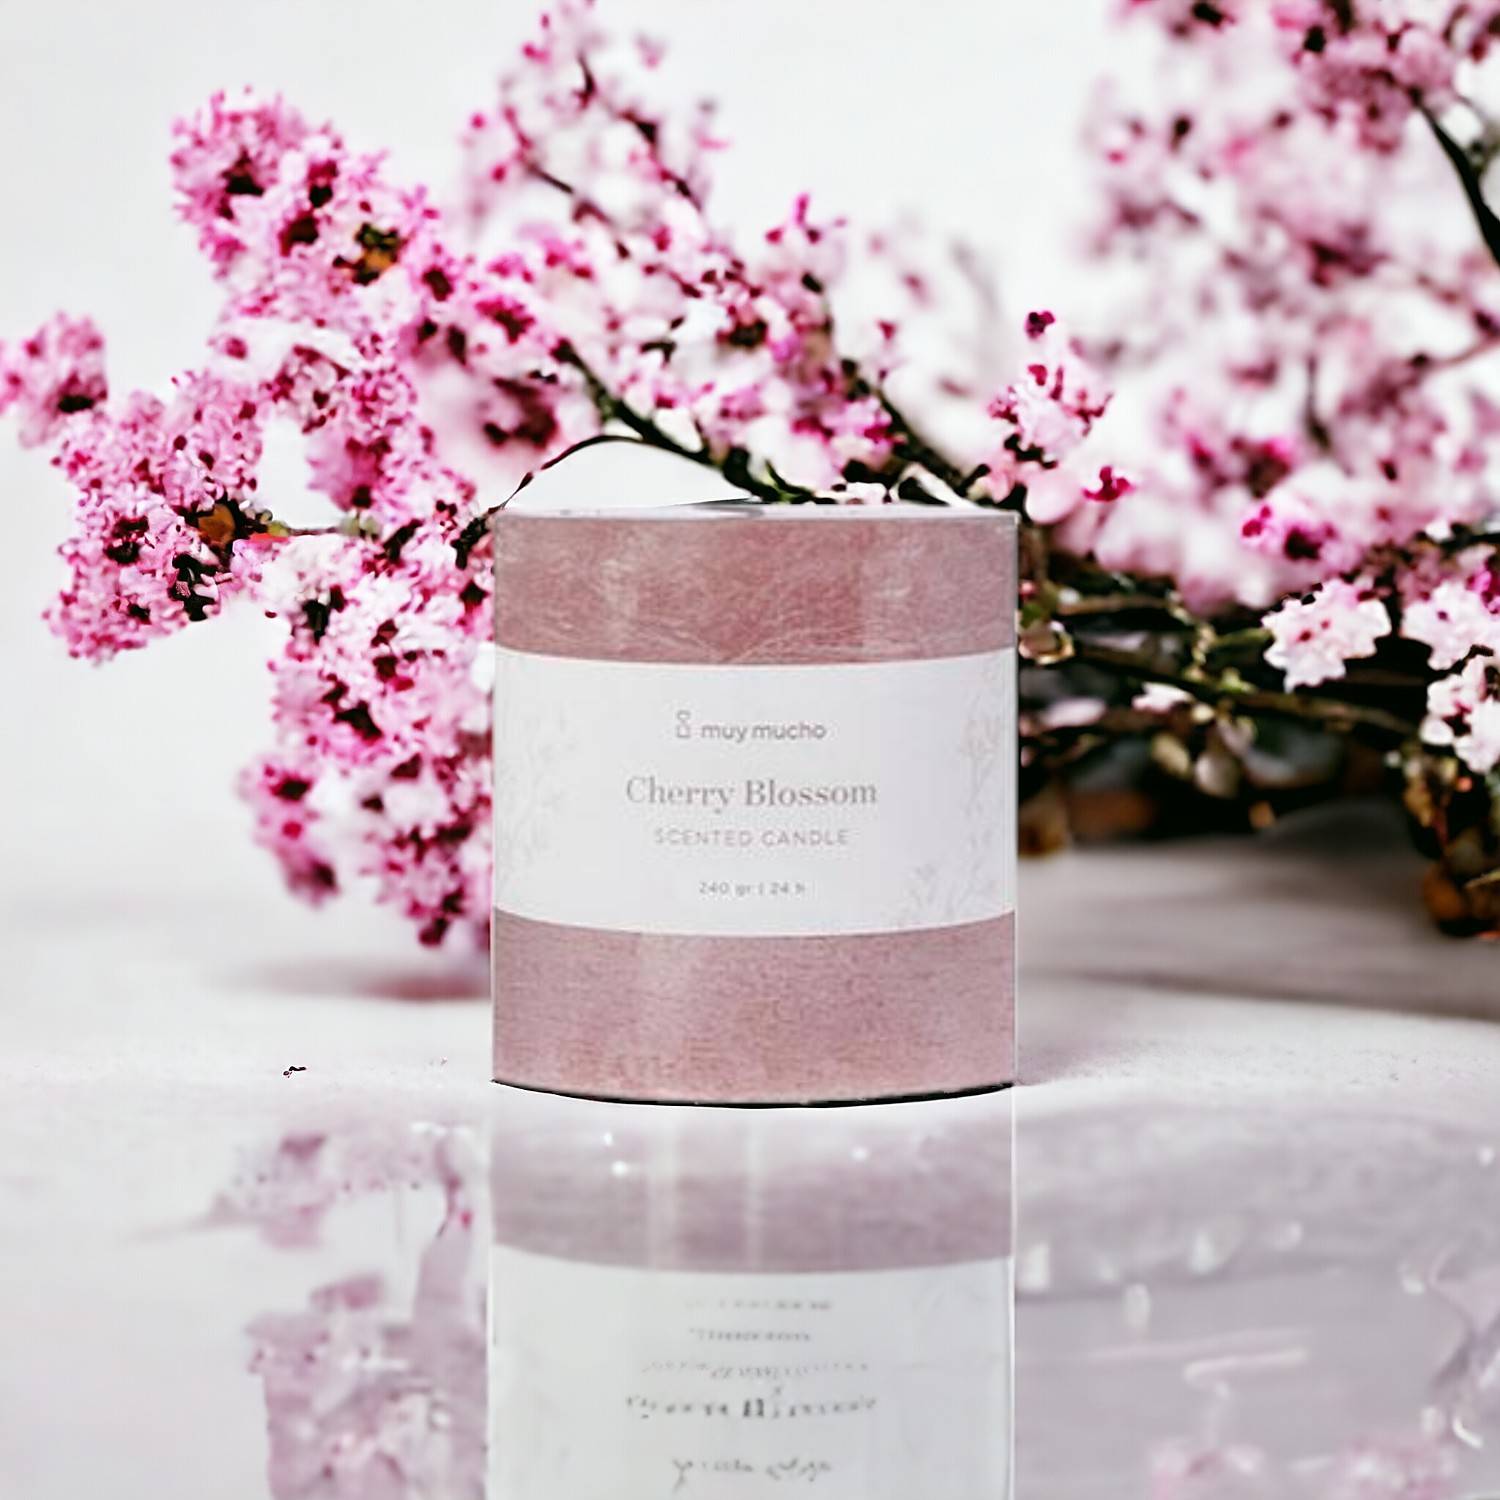 Muy Mucho Cherry Blossom - Bougie décorative petite taille